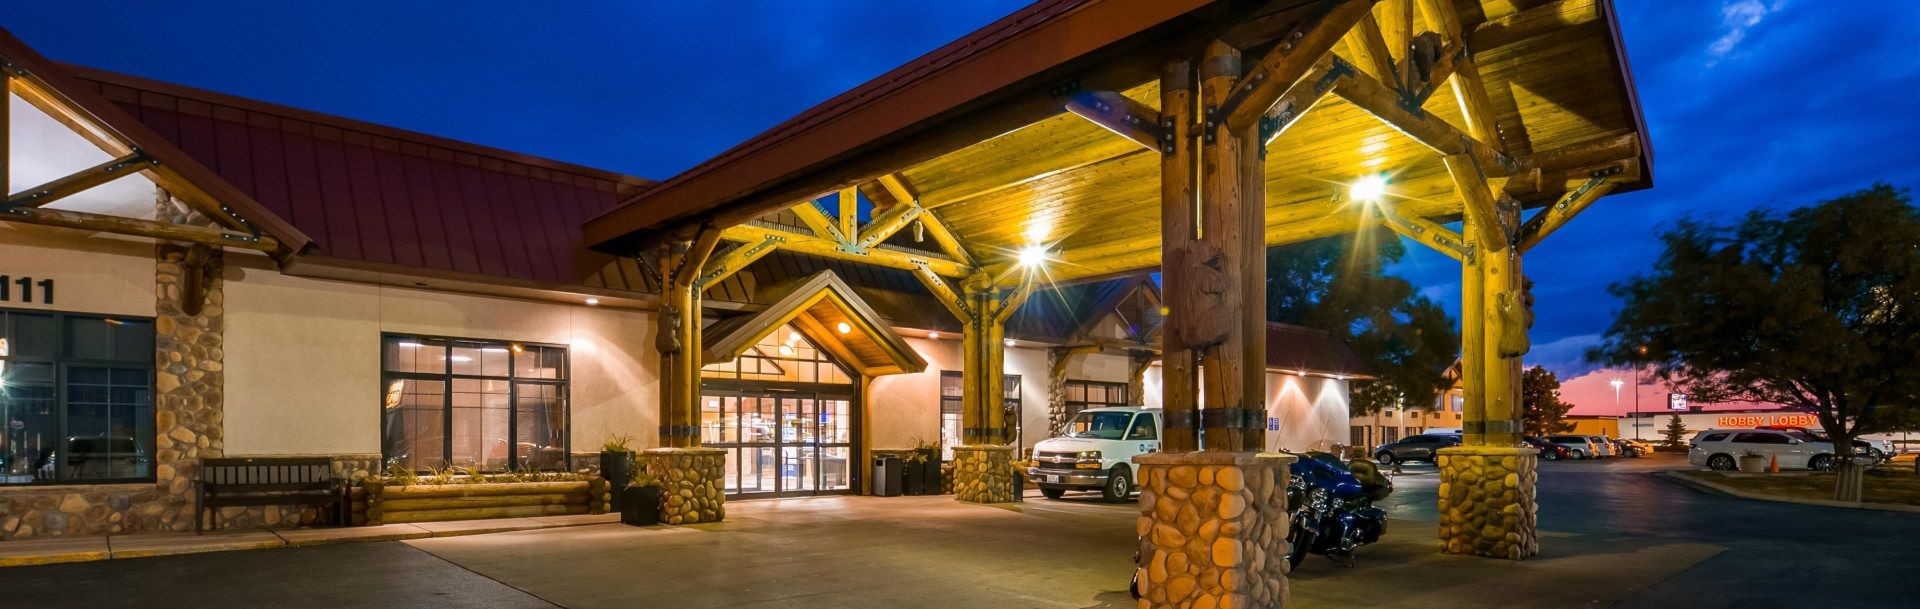 Best Western Ramkota Hotel and Conference Centre, Rapid City 